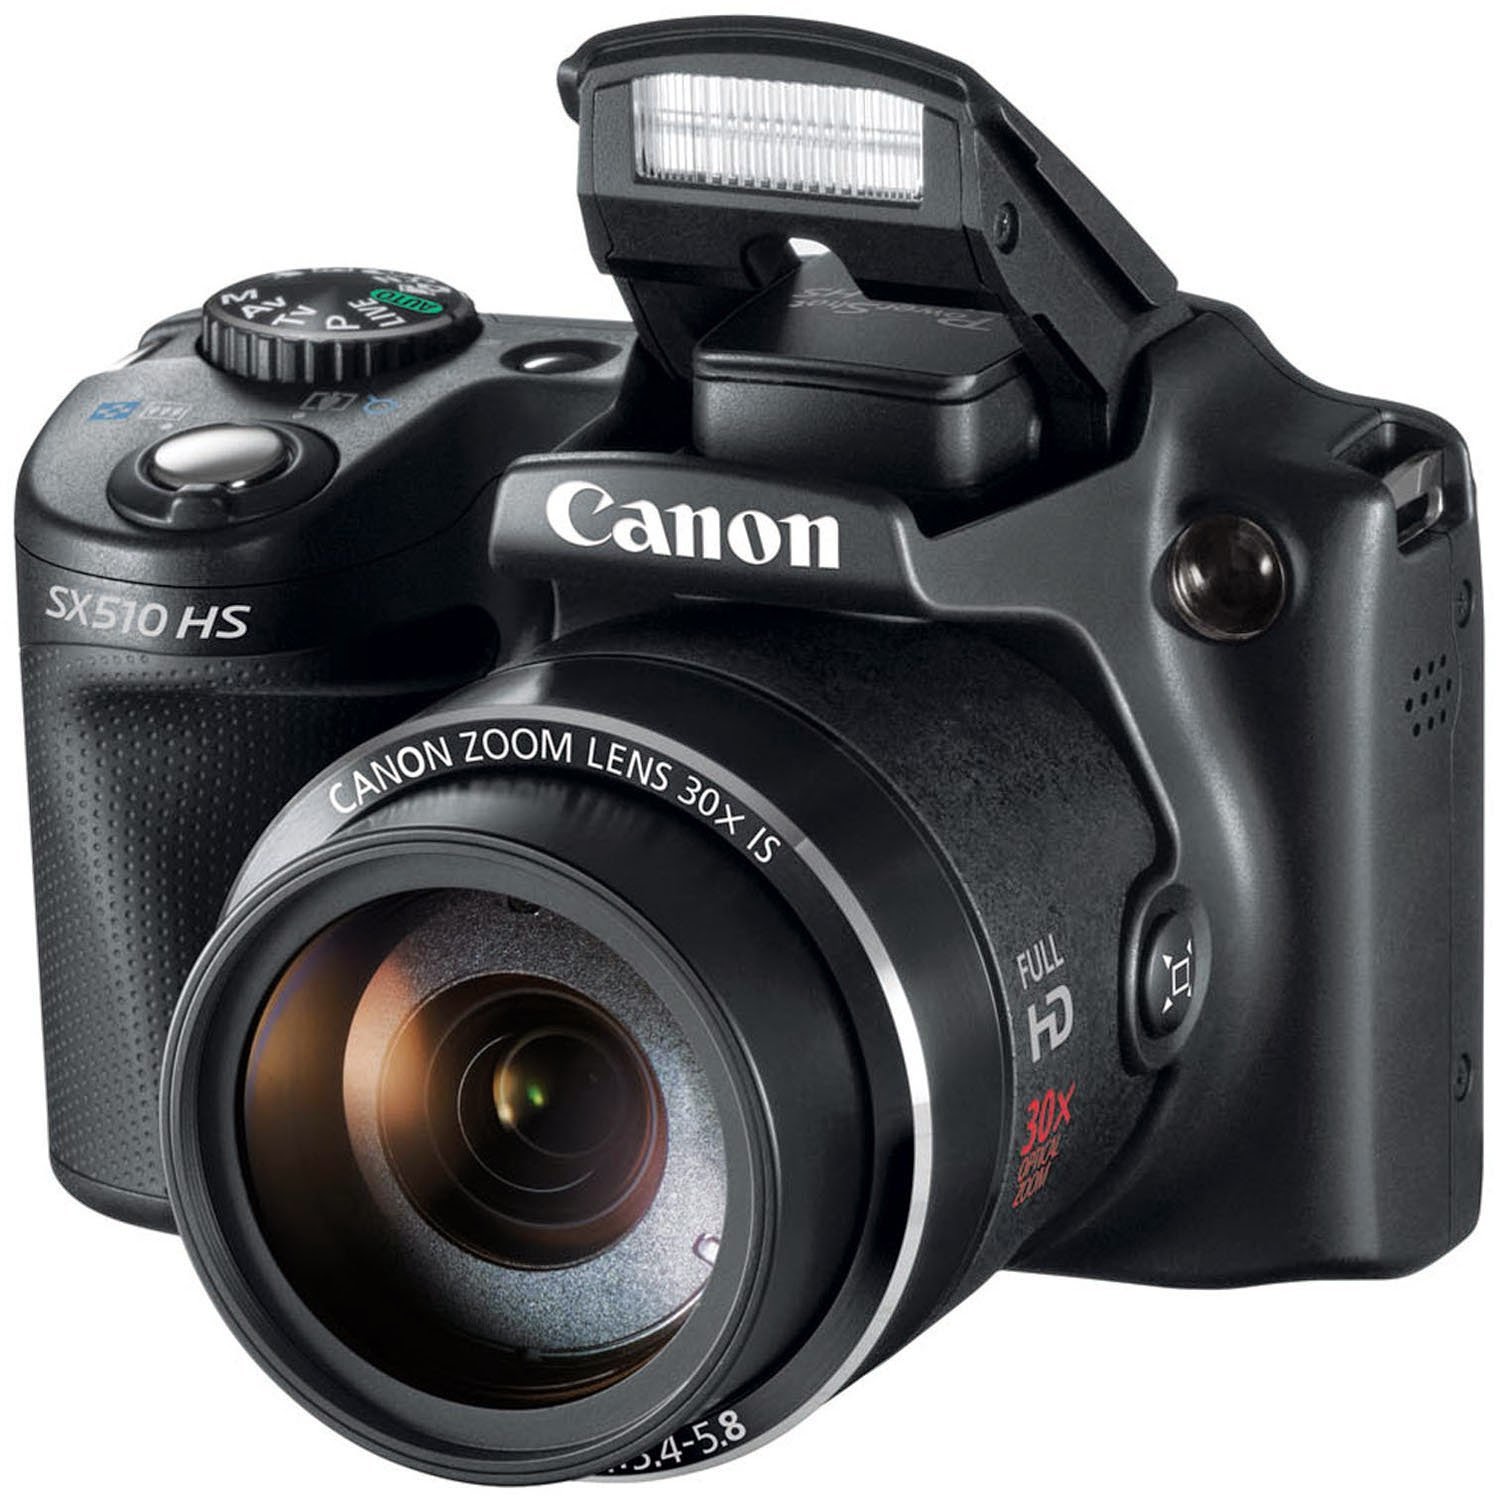 Canon PowerShot SX510 HS 12.1 MP CMOS Digital Camera with 30x optical zoom and 1080p full-HD video, review